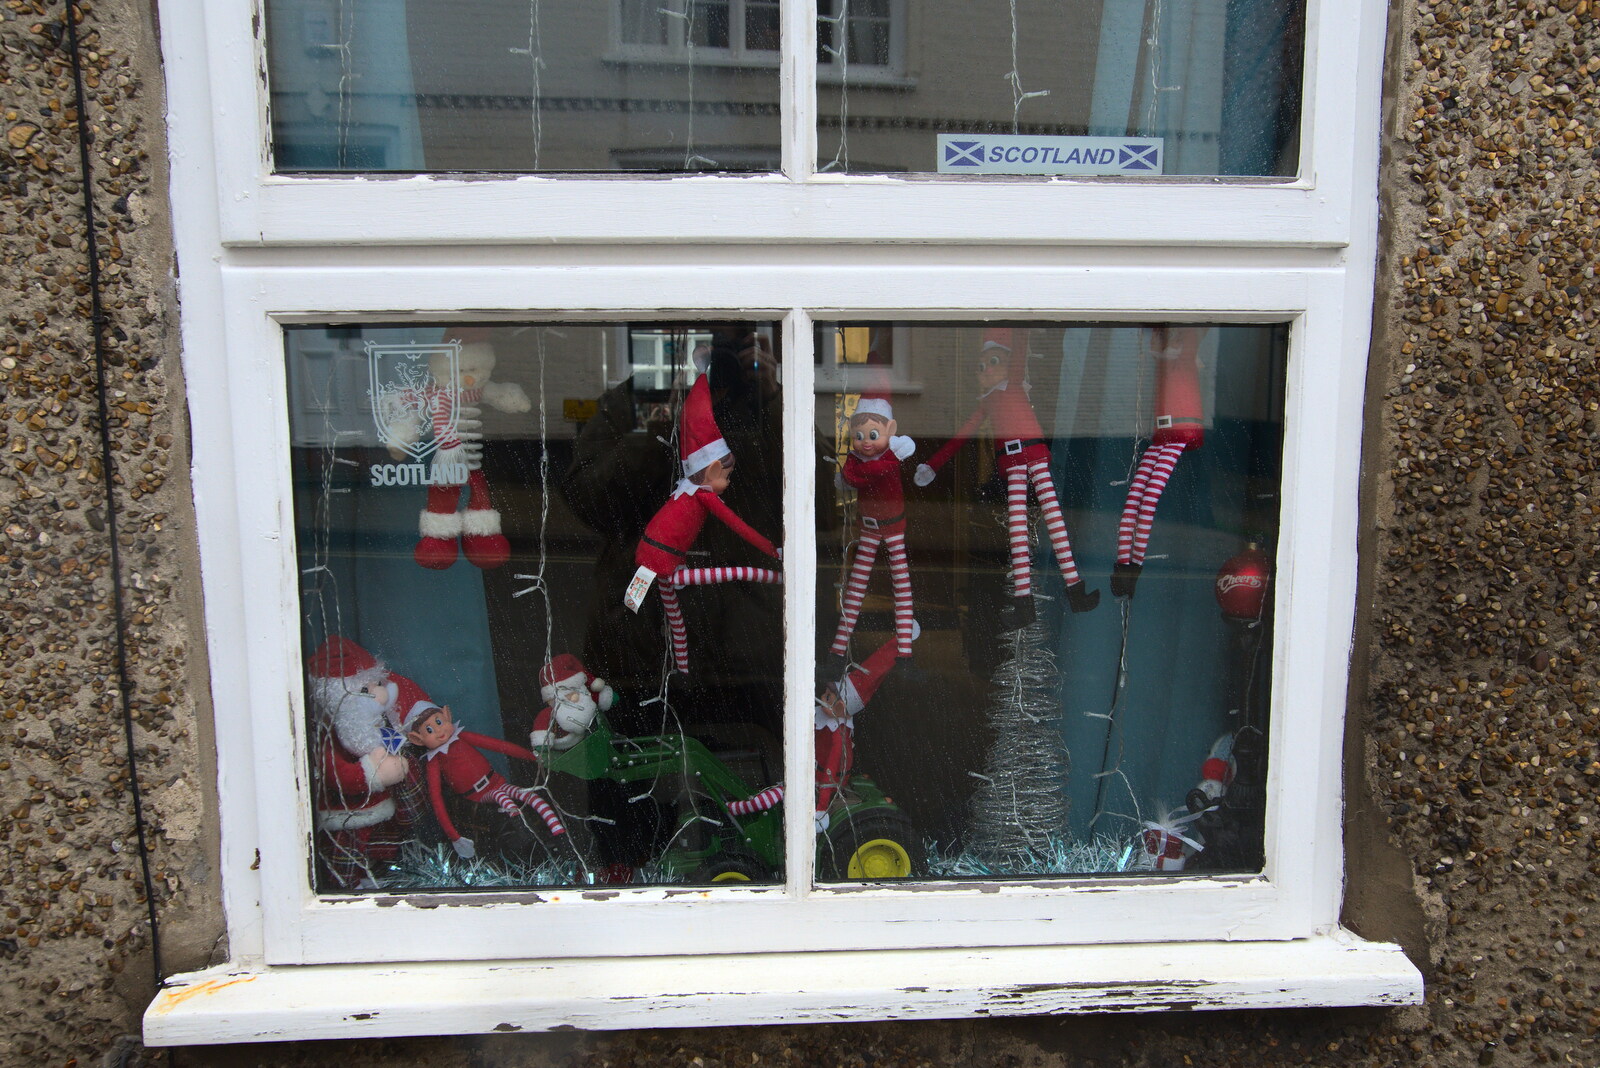 There are a load of Elves on the Shelf in a window from New Year's Day, Brome, Suffolk - 1st January 2022